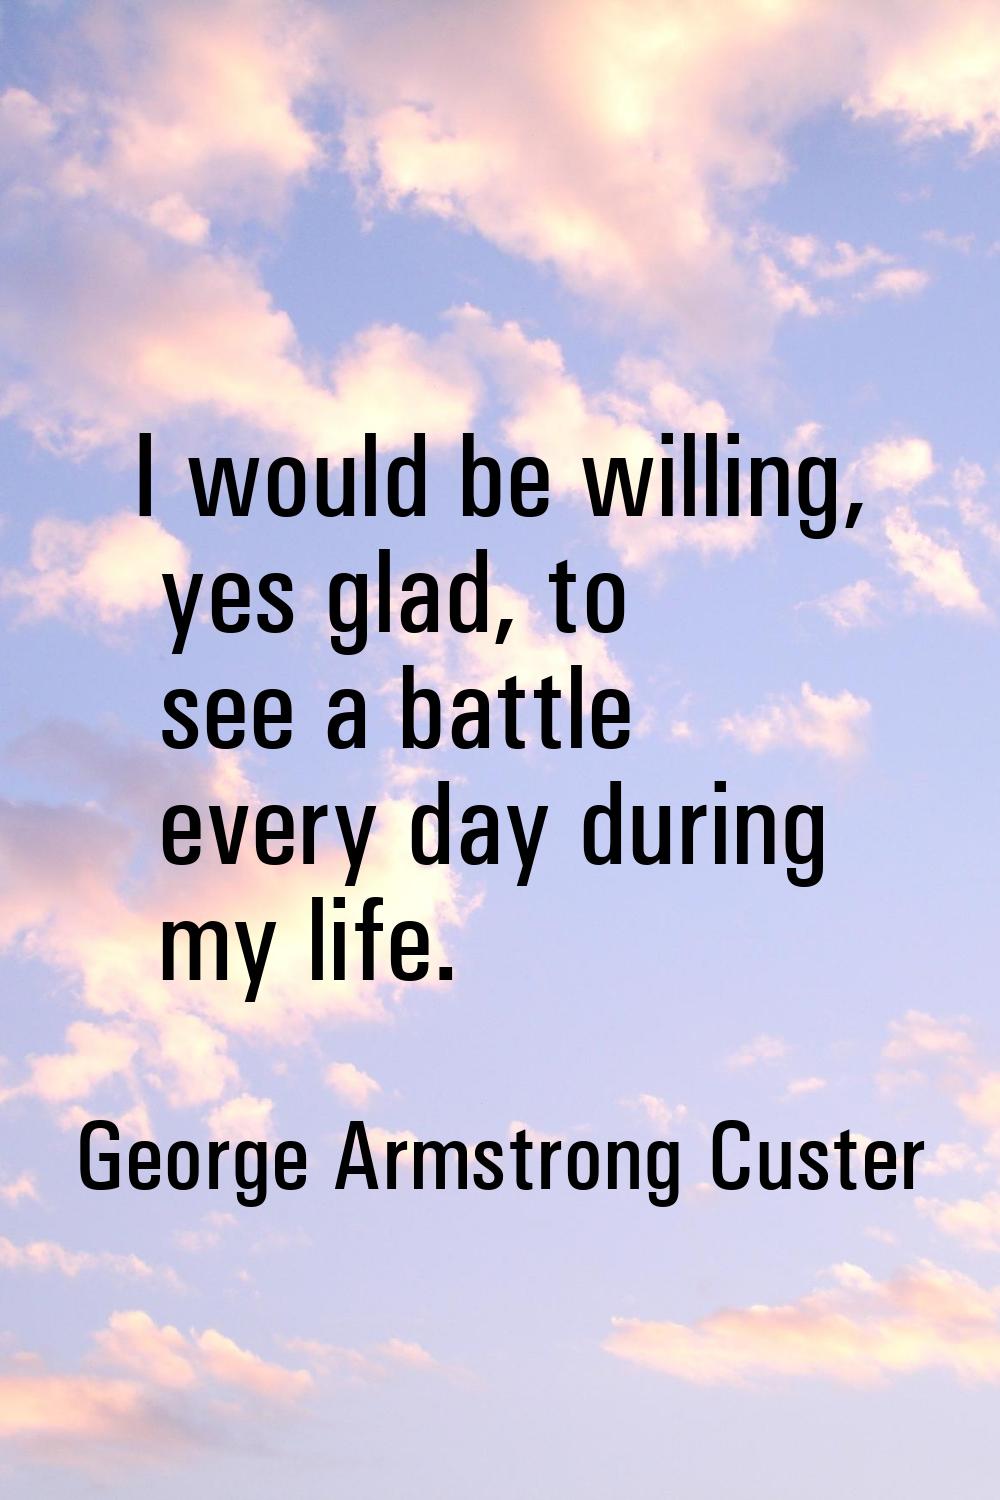 I would be willing, yes glad, to see a battle every day during my life.